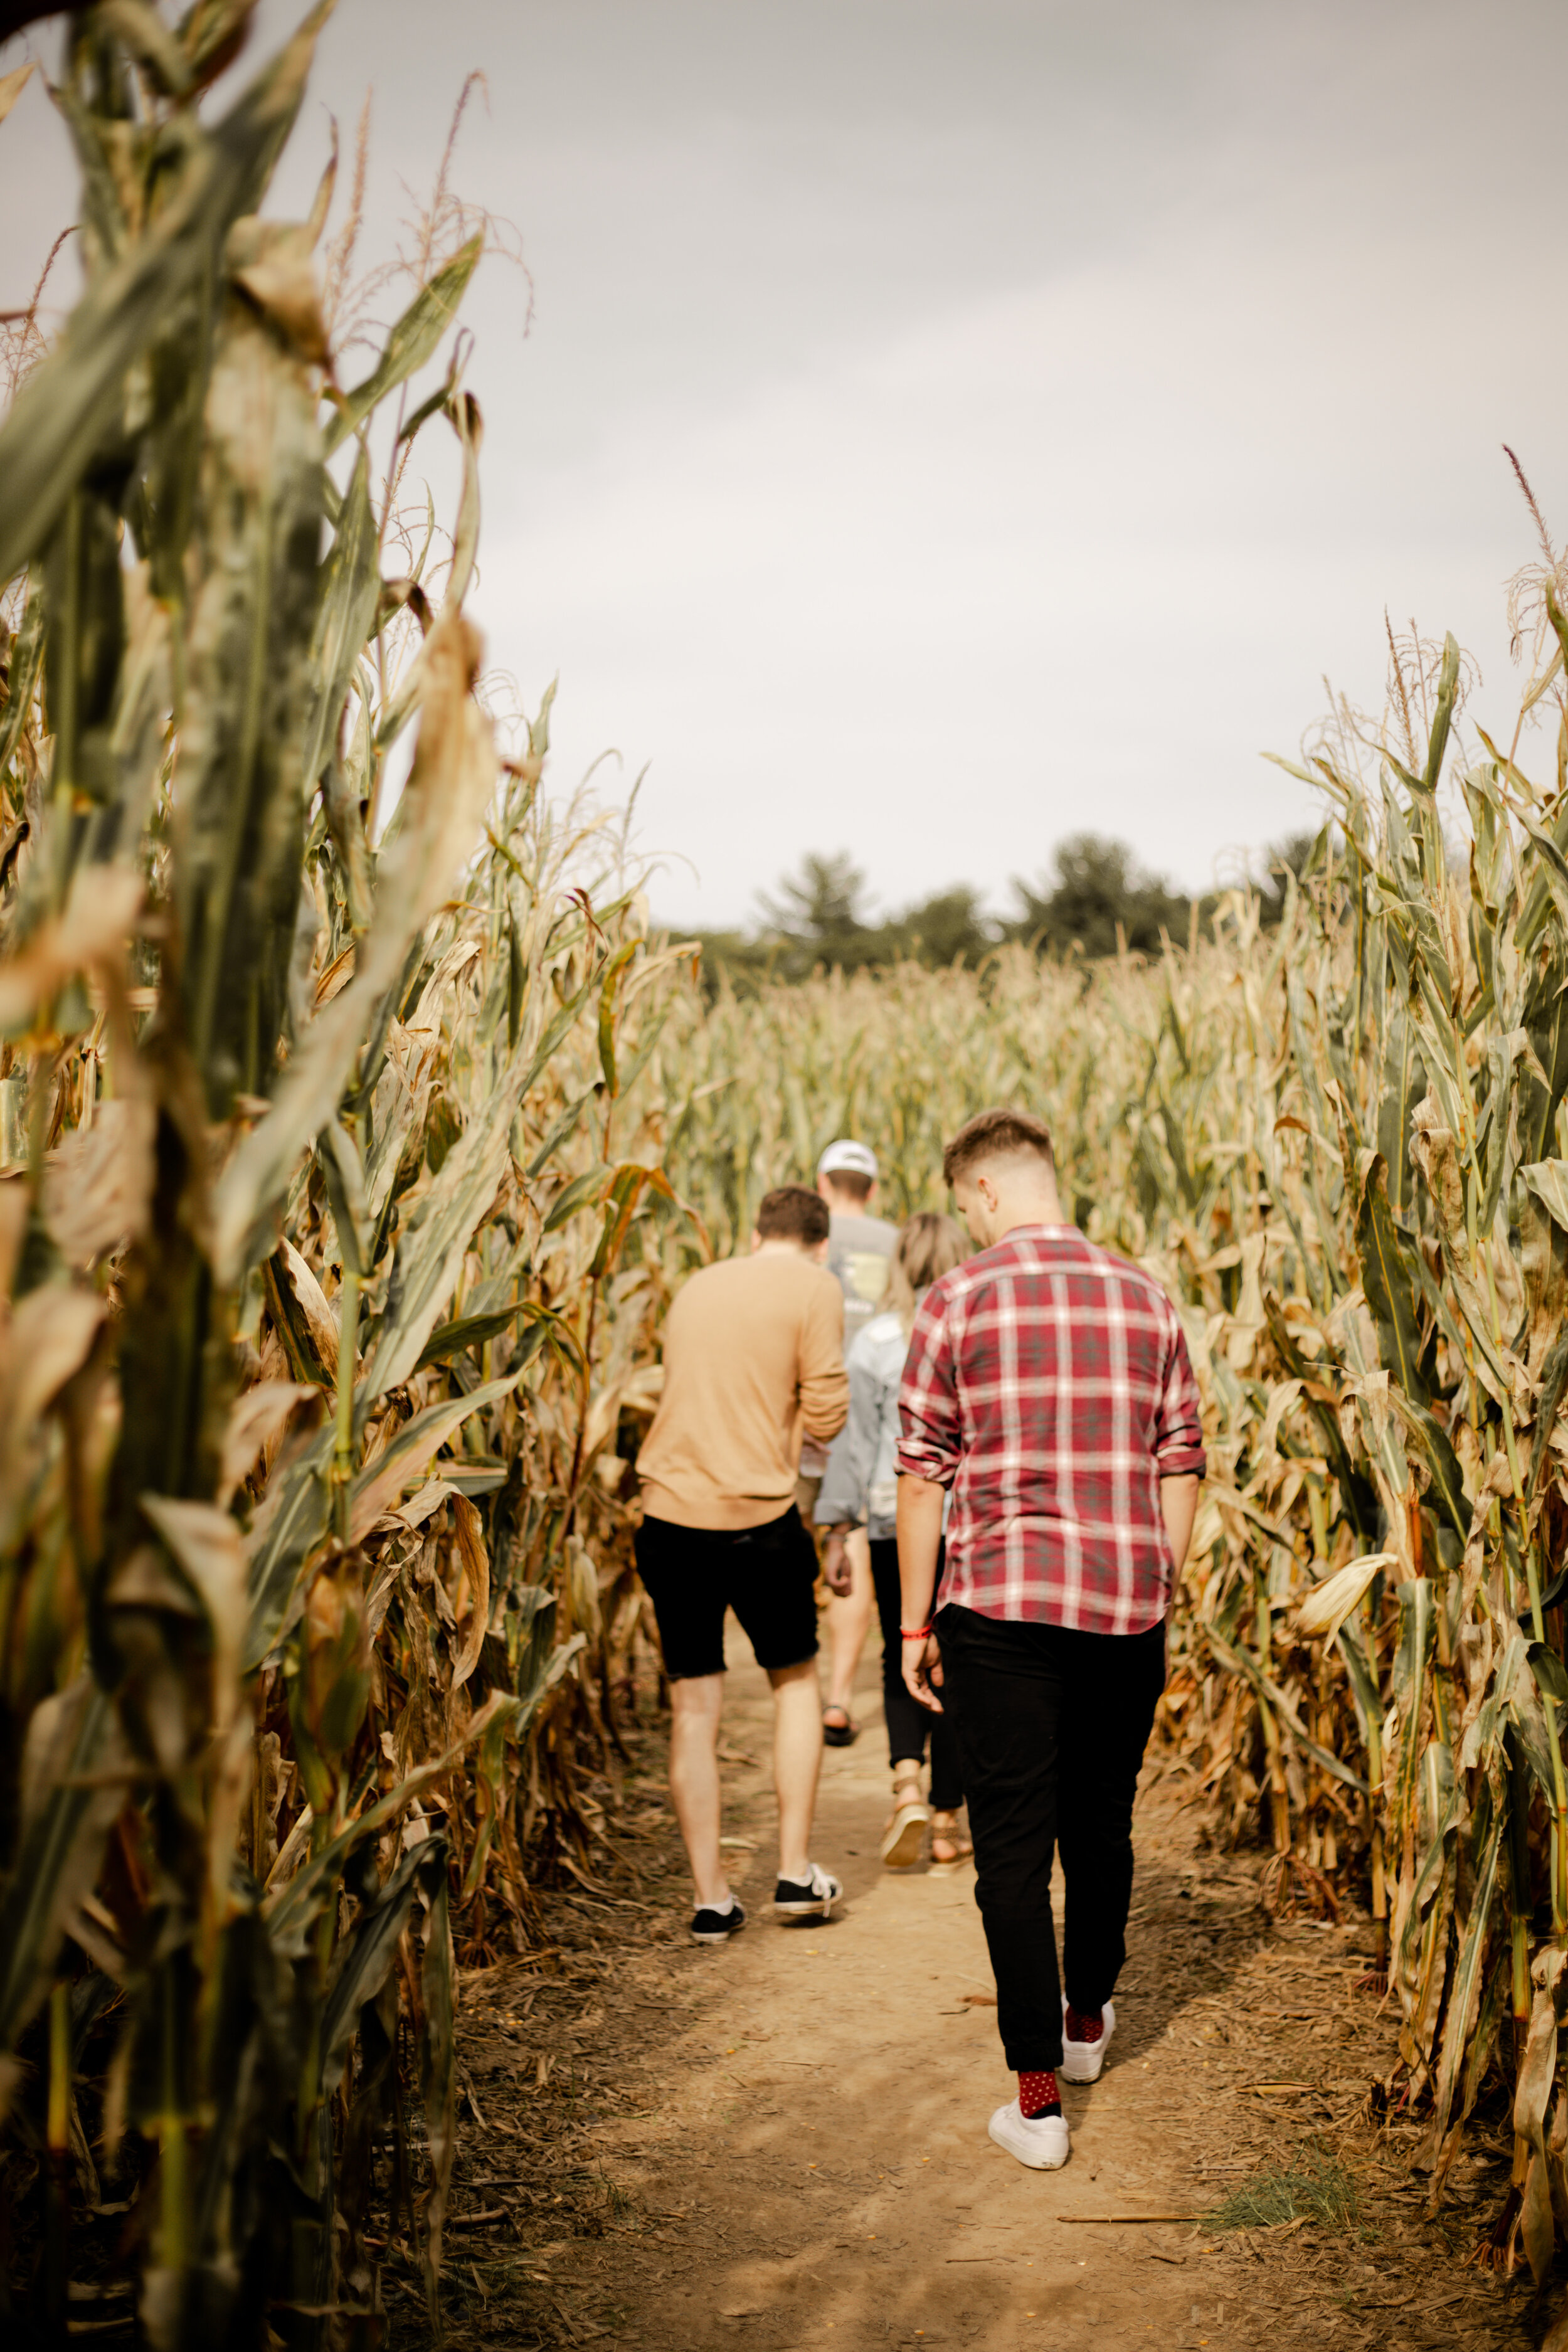 Think you have a good sense of direction? Test your skills by trying to navigate the corn maze with a group of friends.